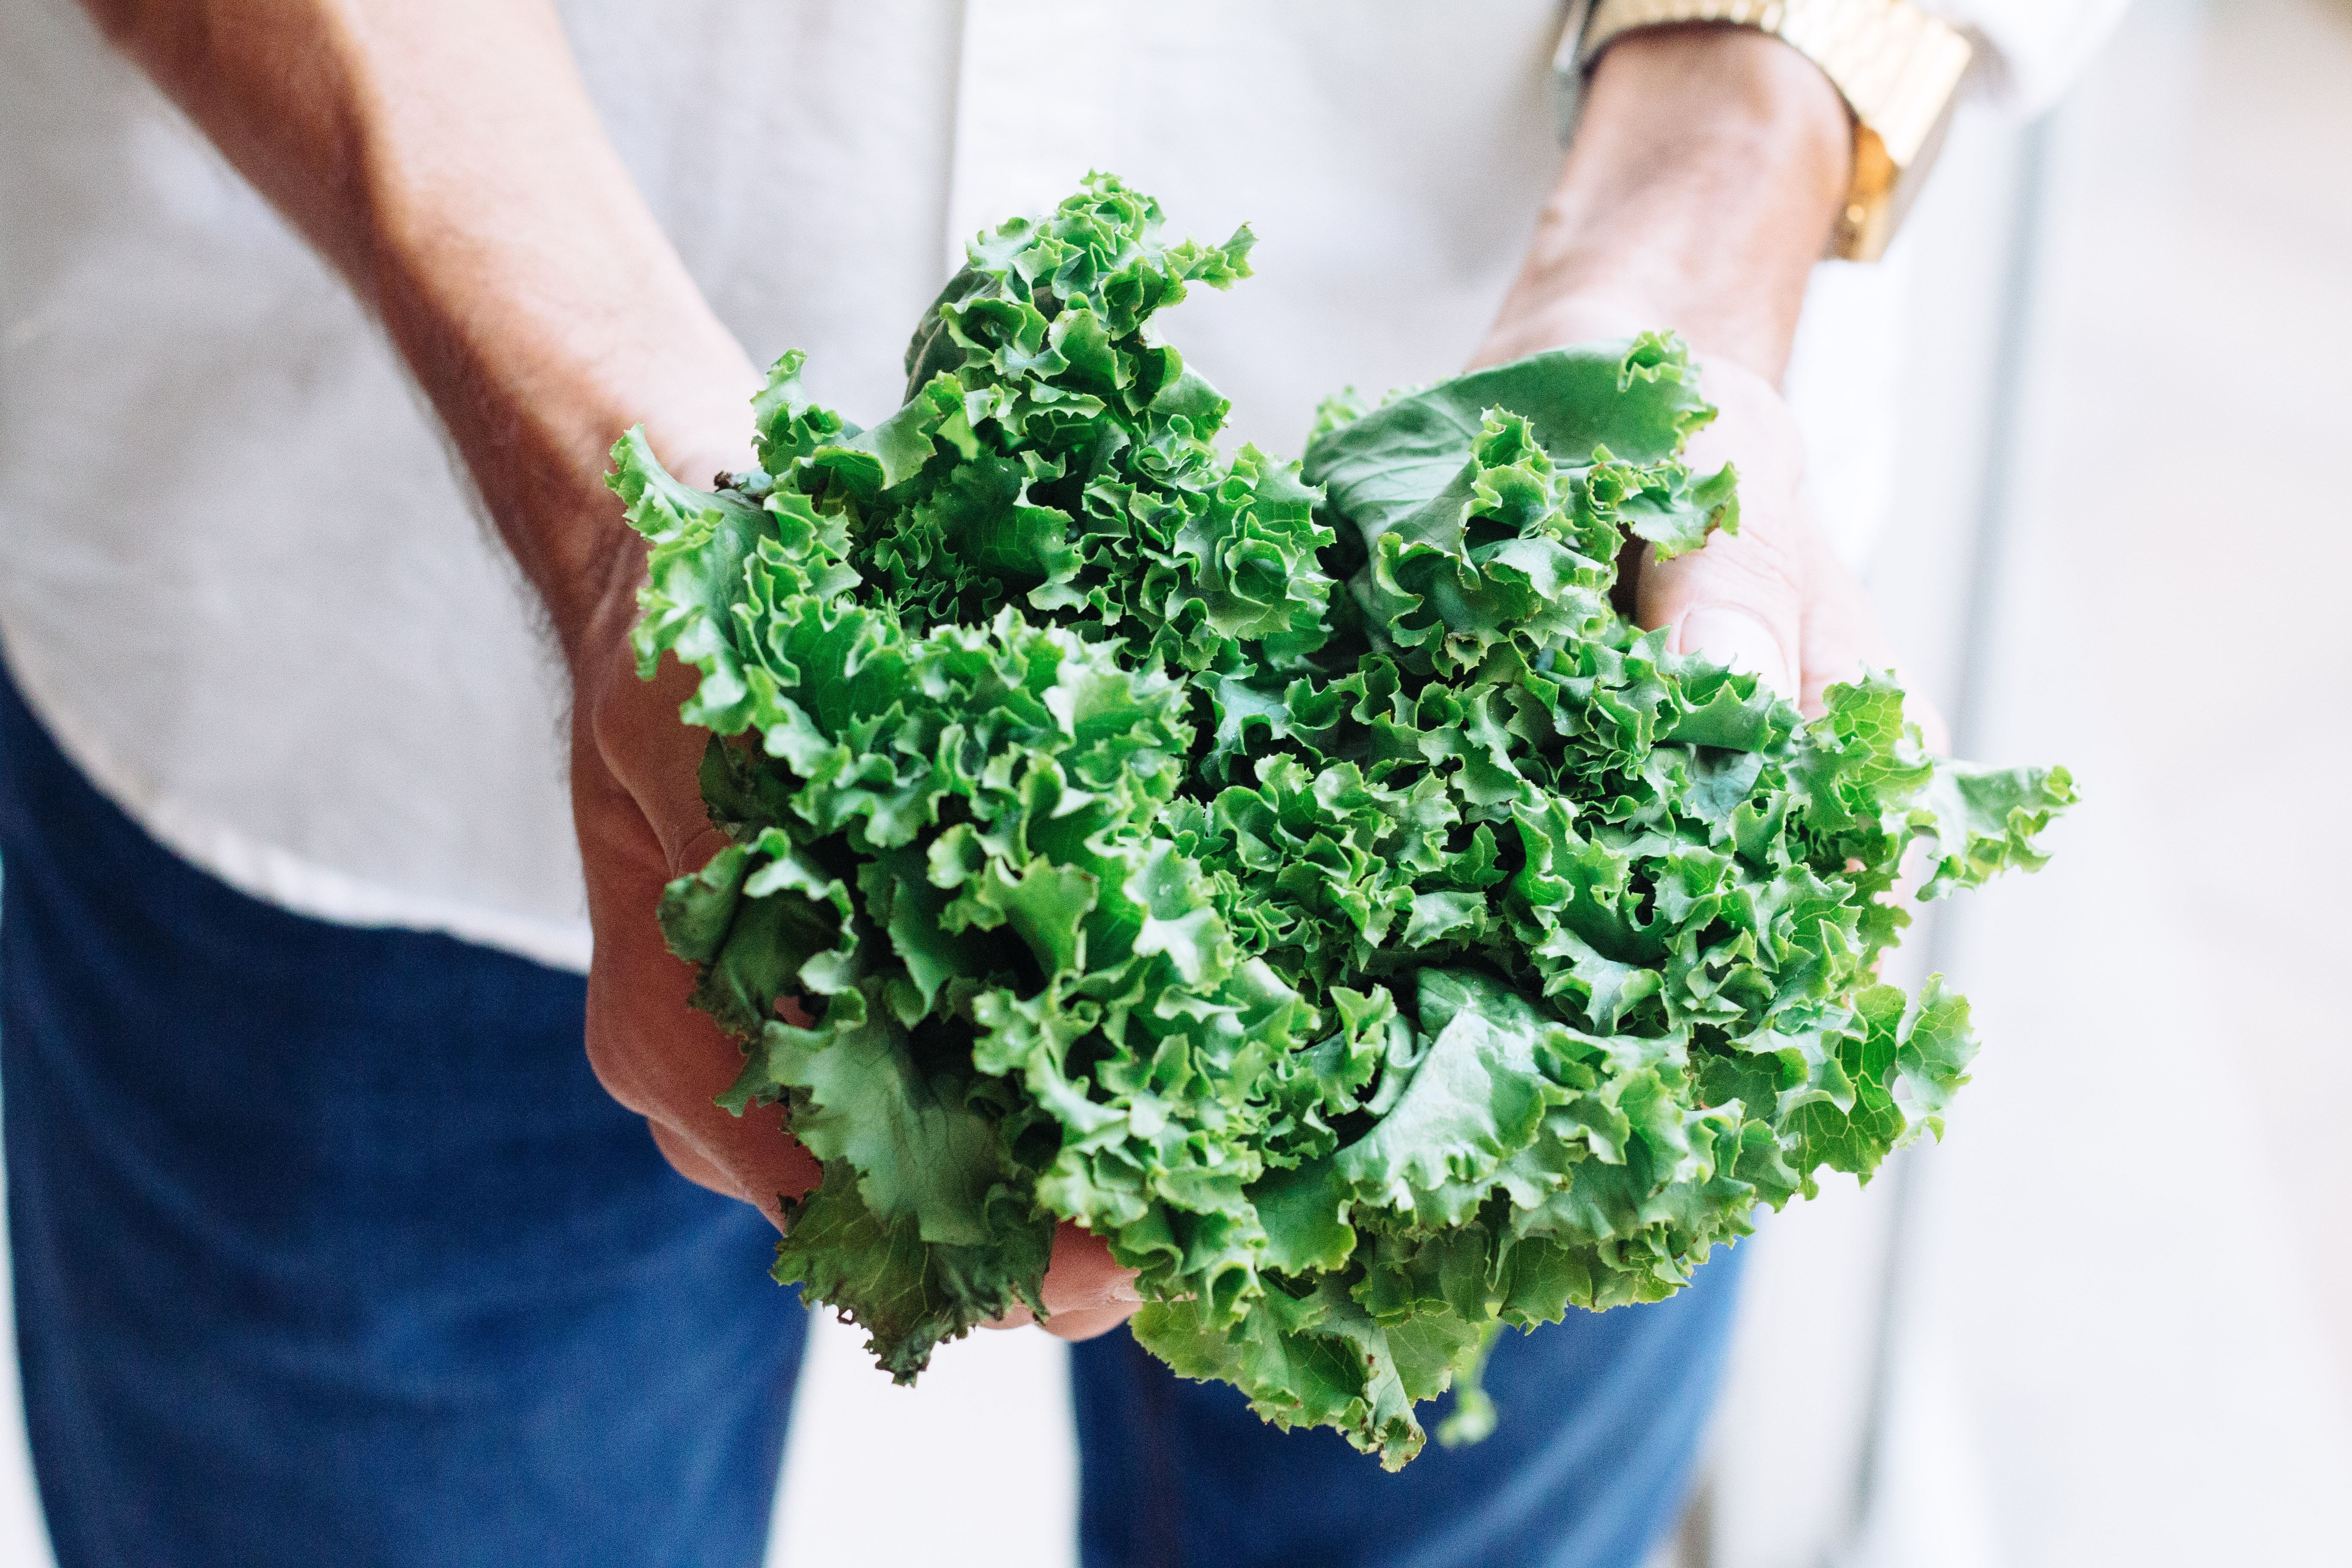 Why Green Leafy Vegetables Should be a part of your diet